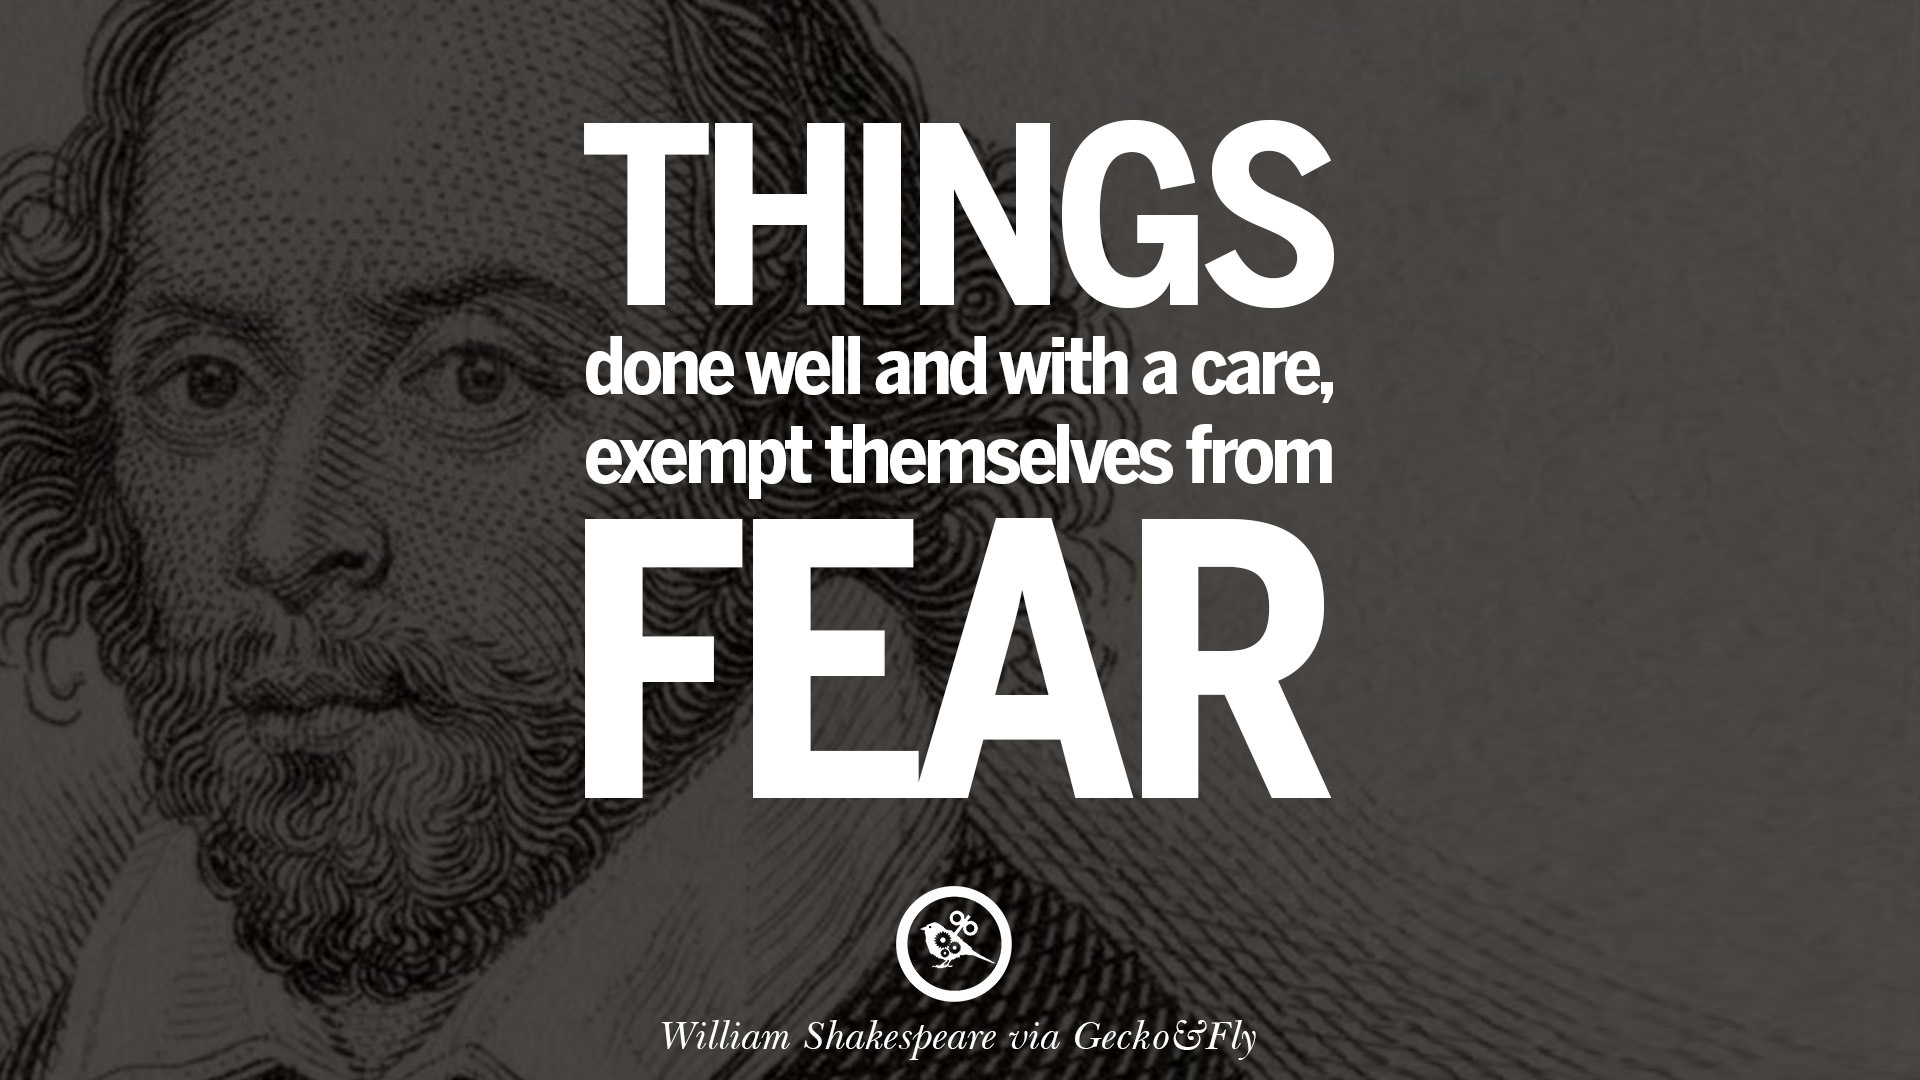 The motivation of fear in macbeth by william shakespeare